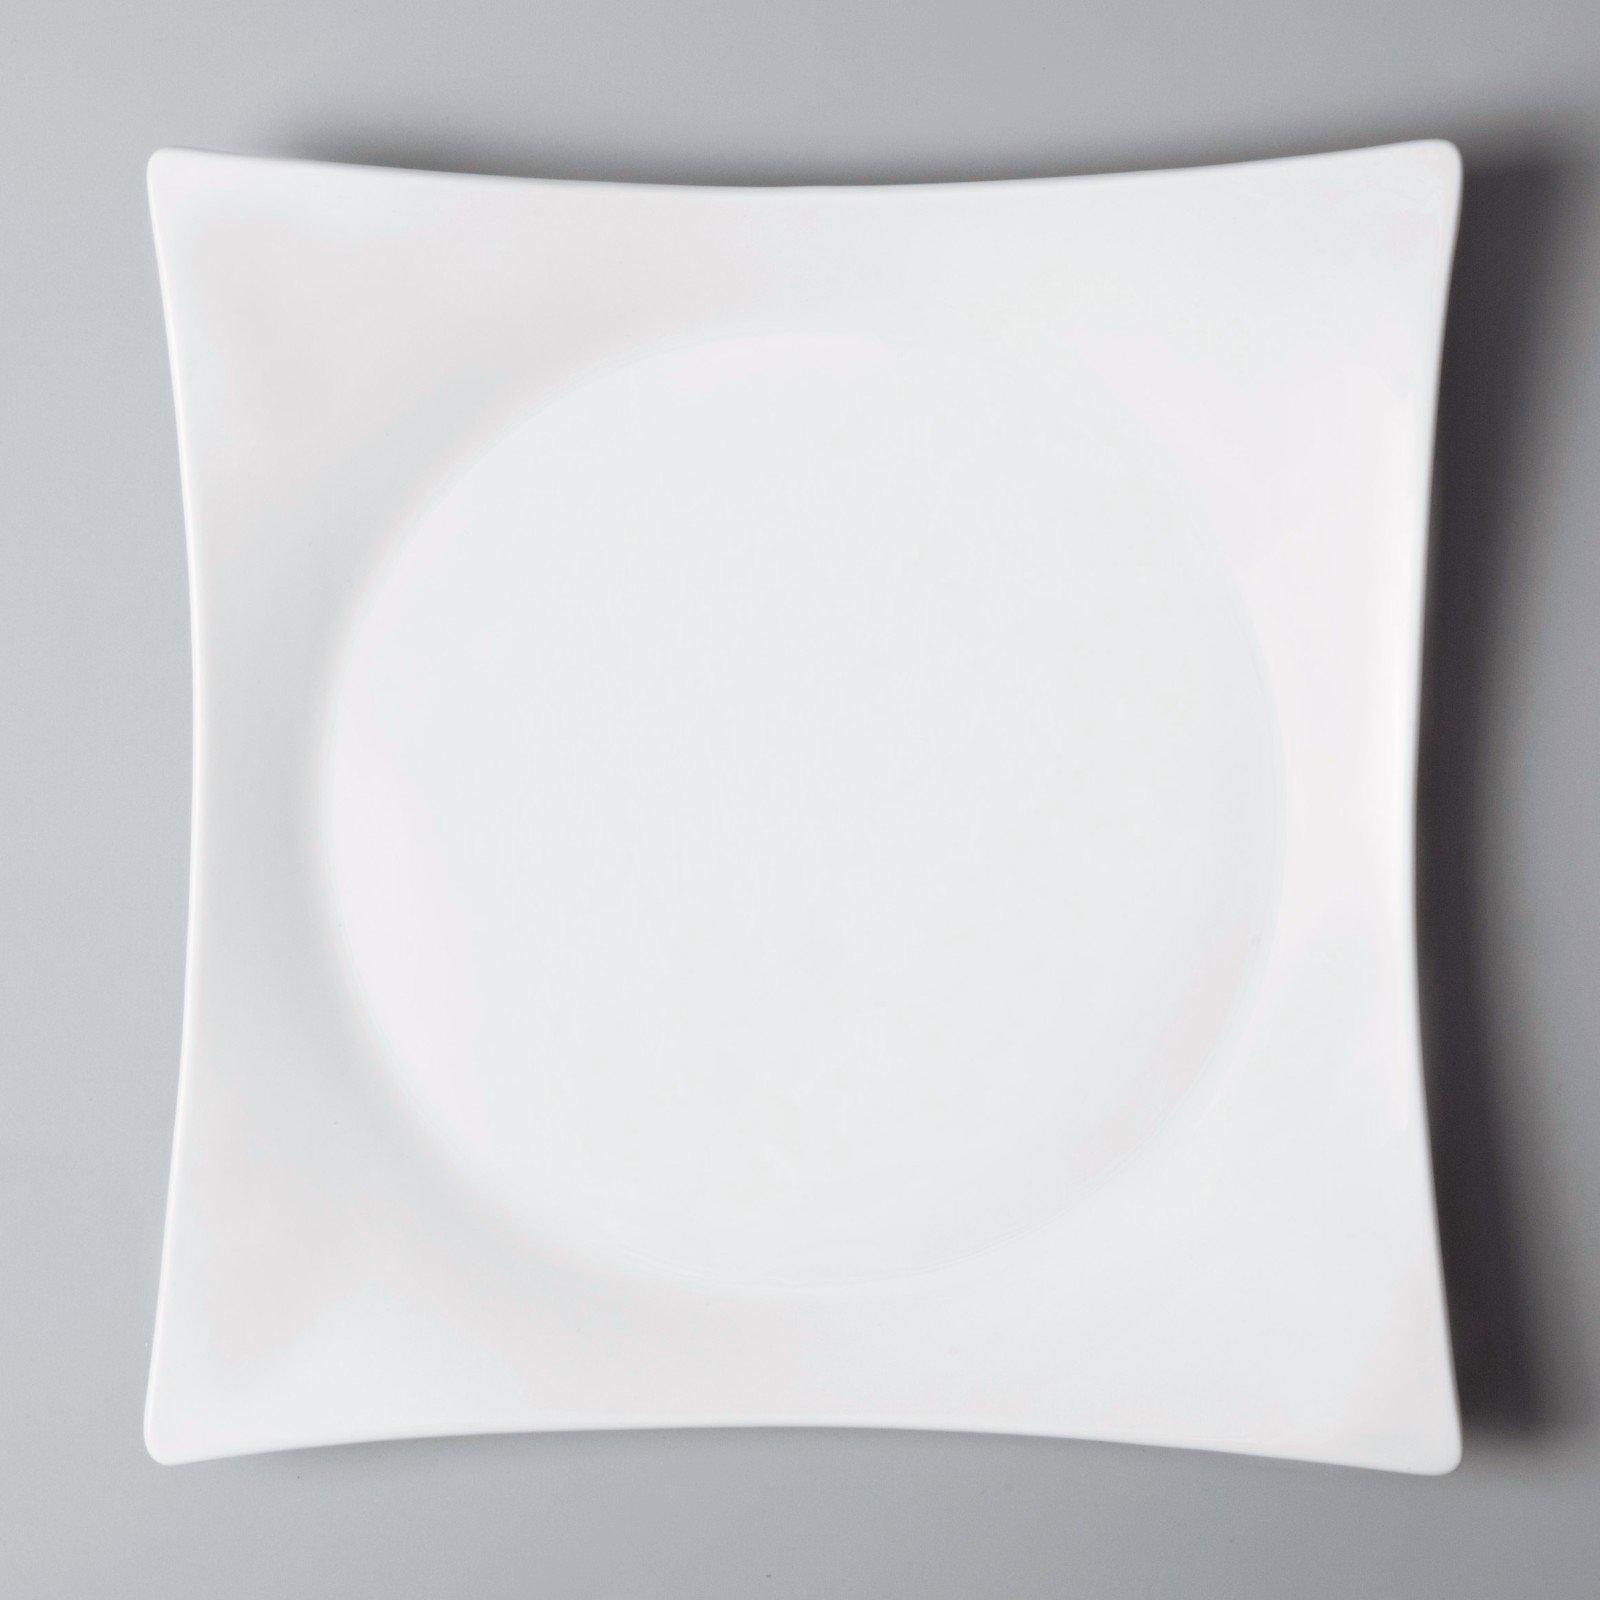 Two Eight casual restaurant style dinner plates series for dinner-2